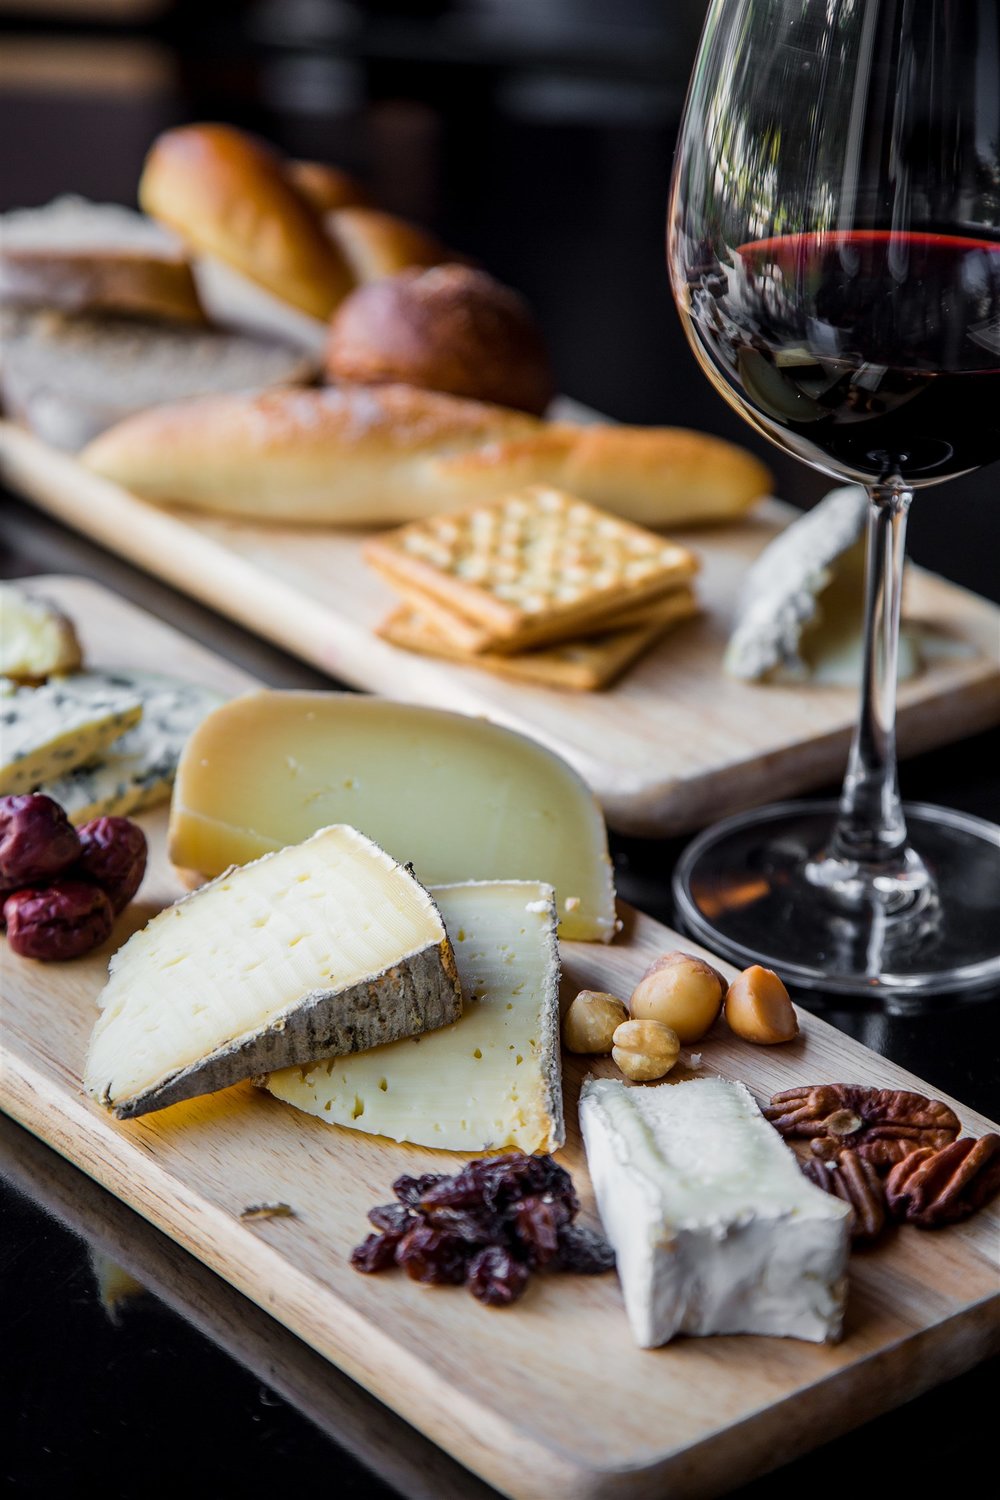   Basalt 's cheese platters are popular for apres-ski as well as late night eats.  Dreamstime  